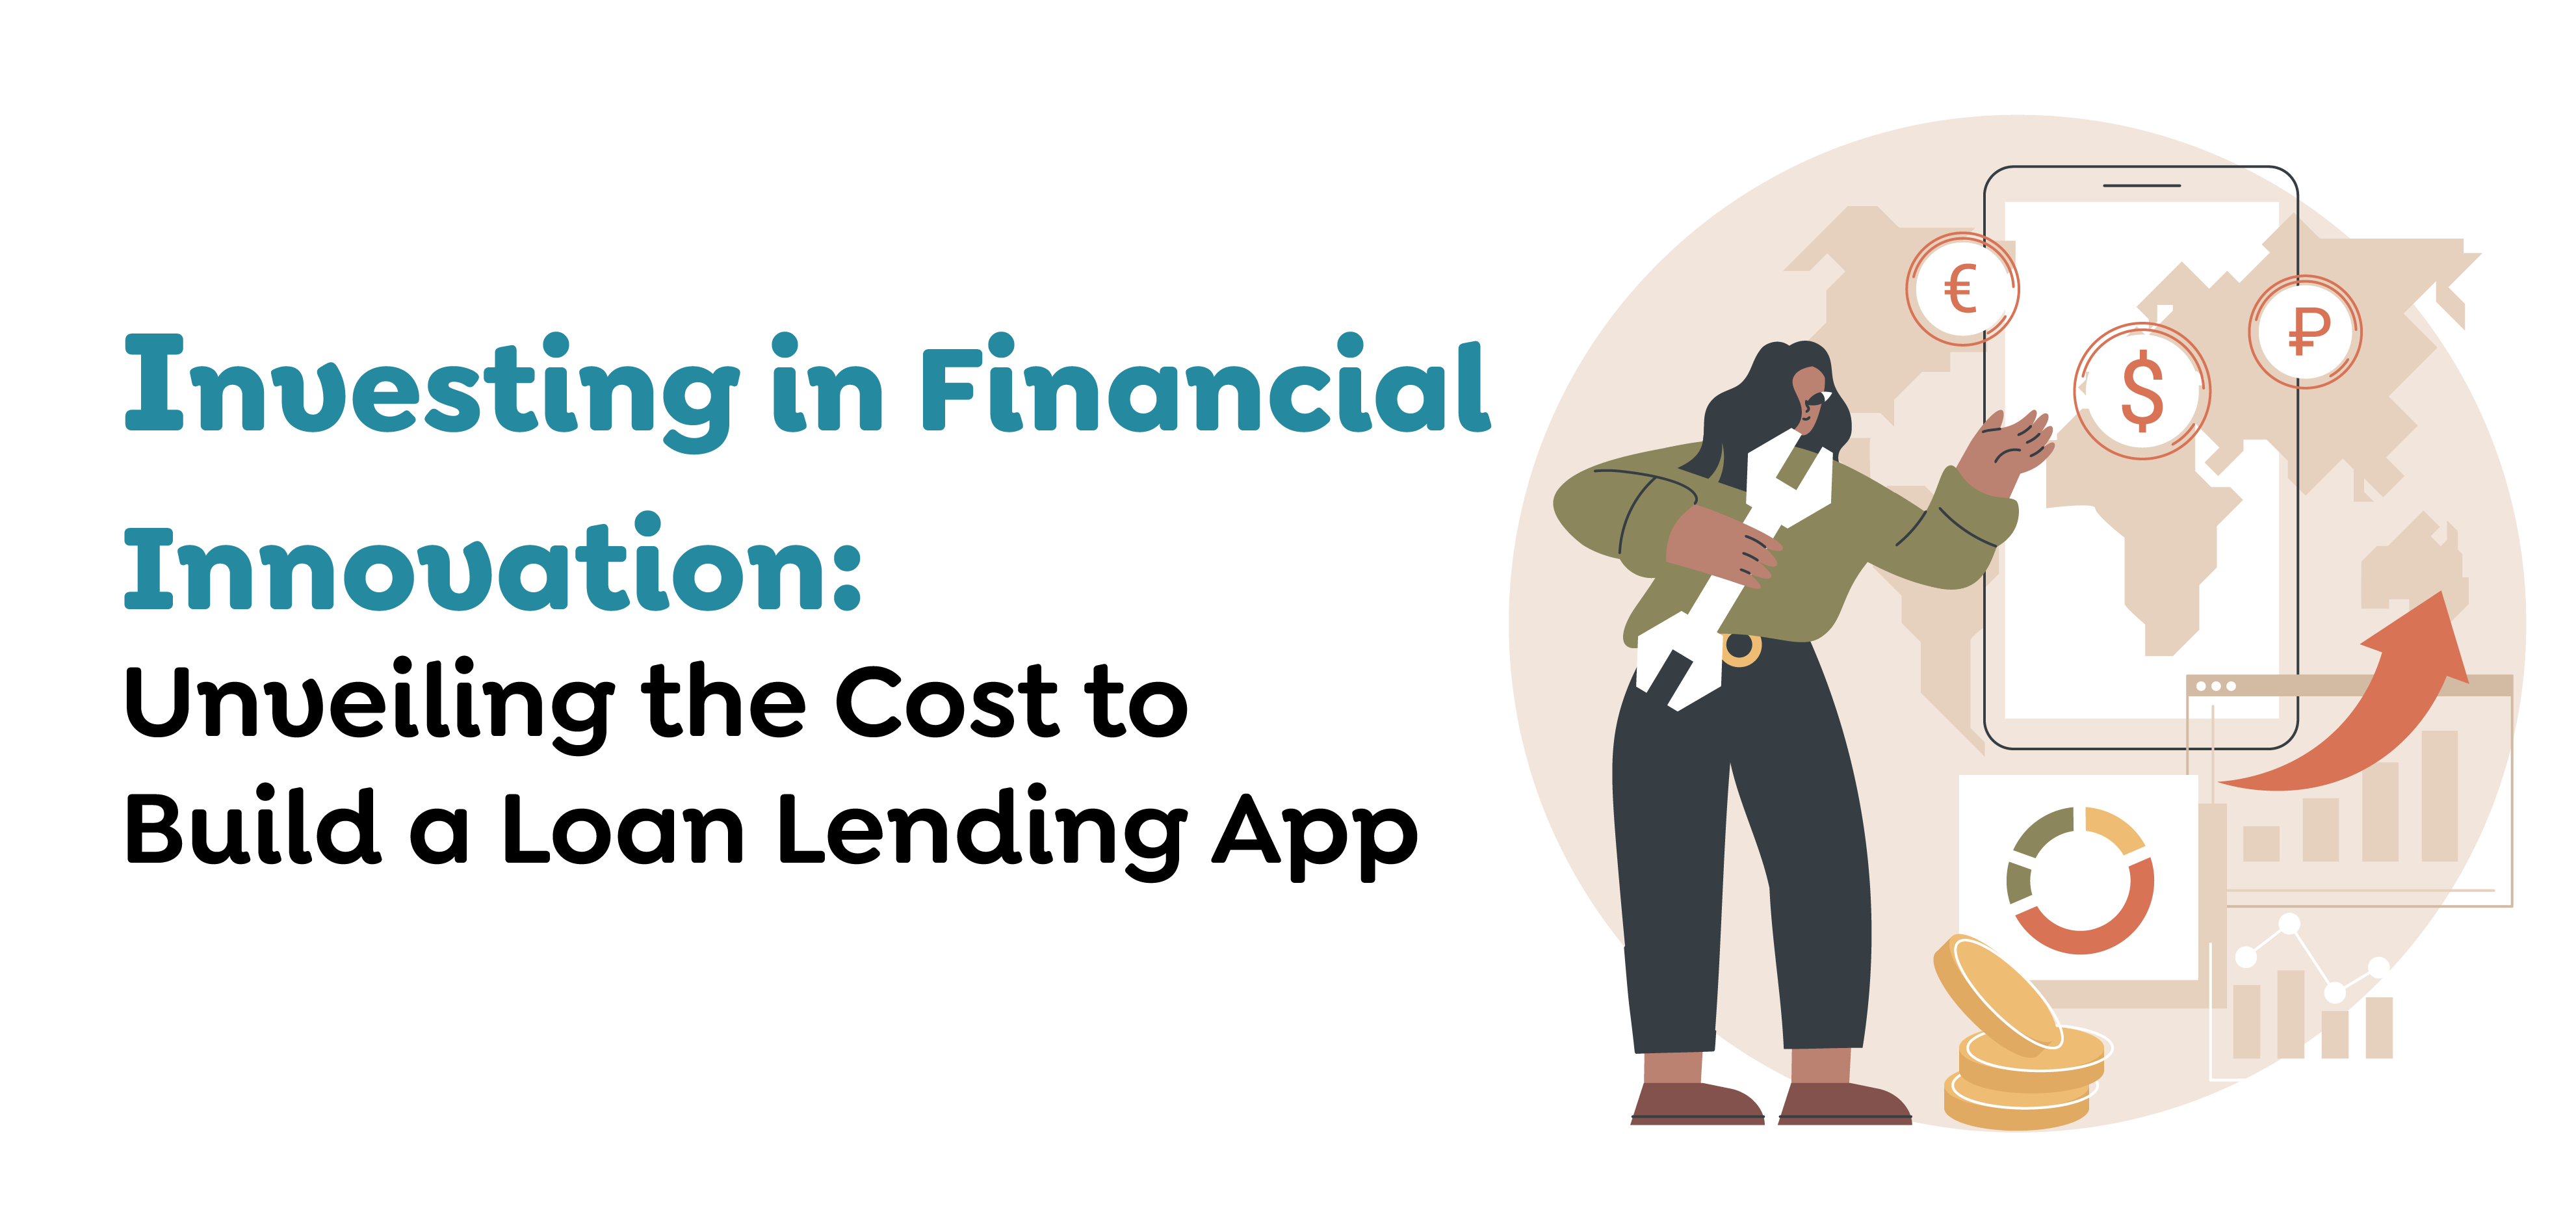 Cost to Build a Loan Lending App